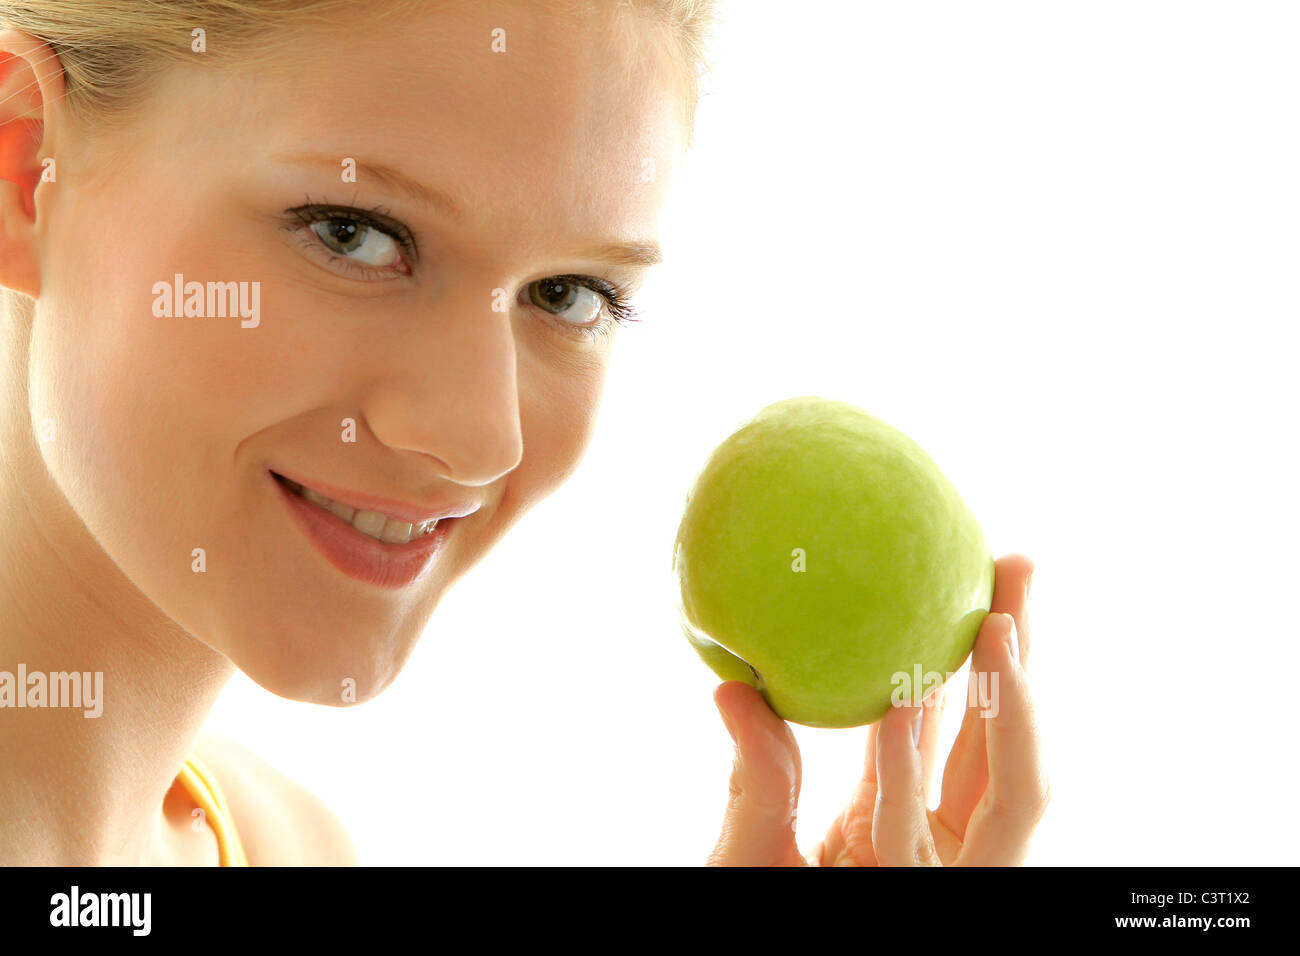 Woman with a fresh green apple Stock Photo